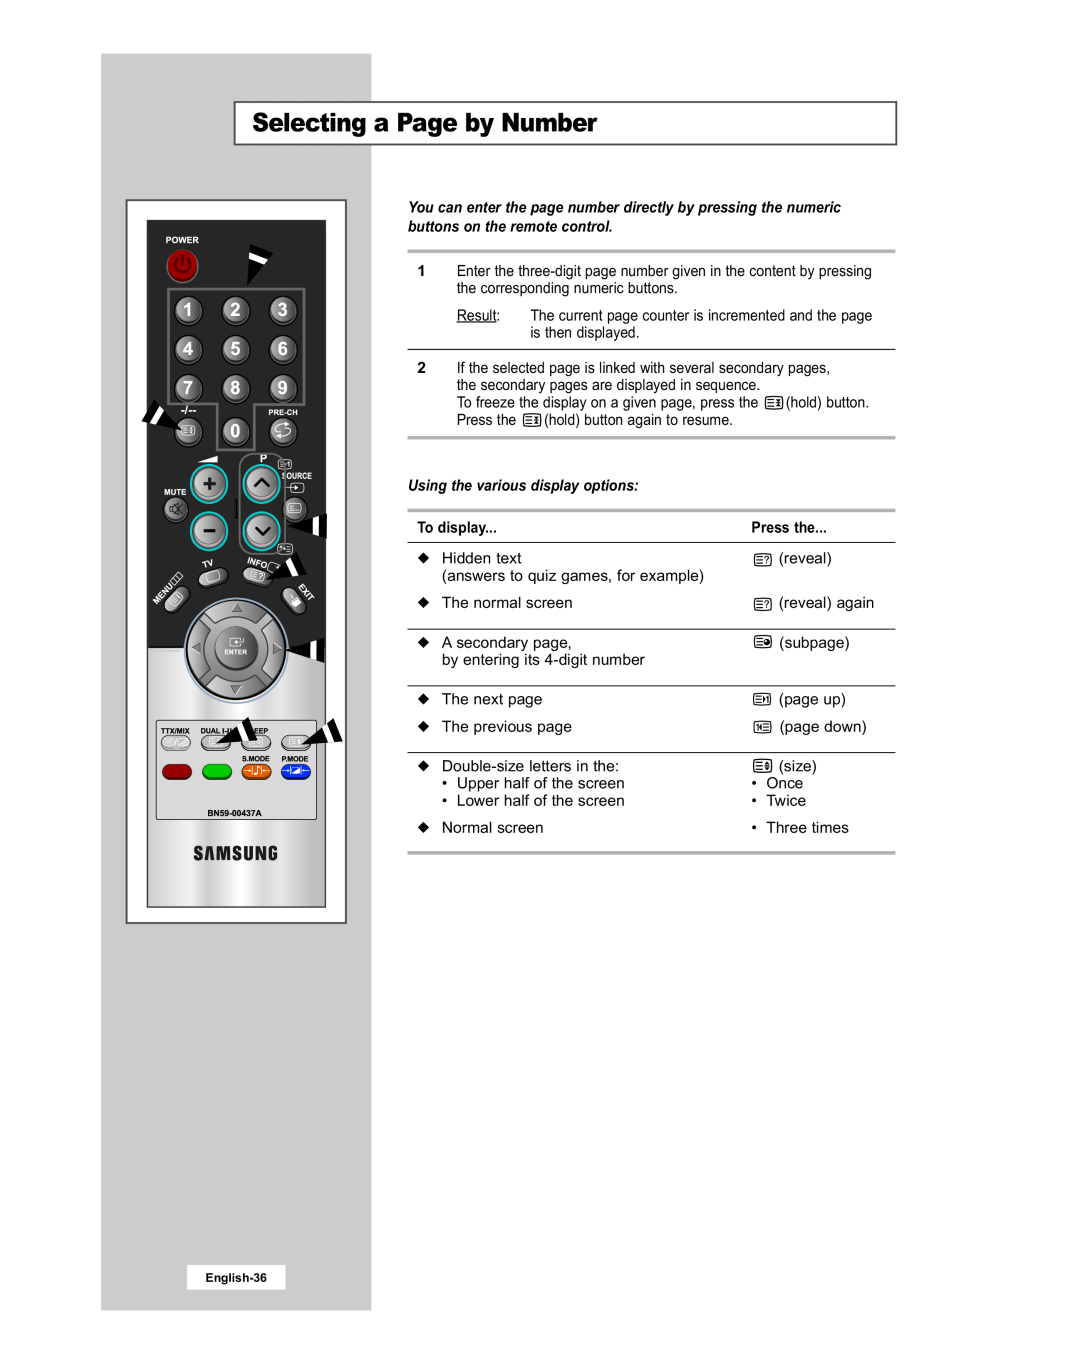 Samsung LE20S51BU manual Selecting a Page by Number, Using the various display options, To display, Press the 